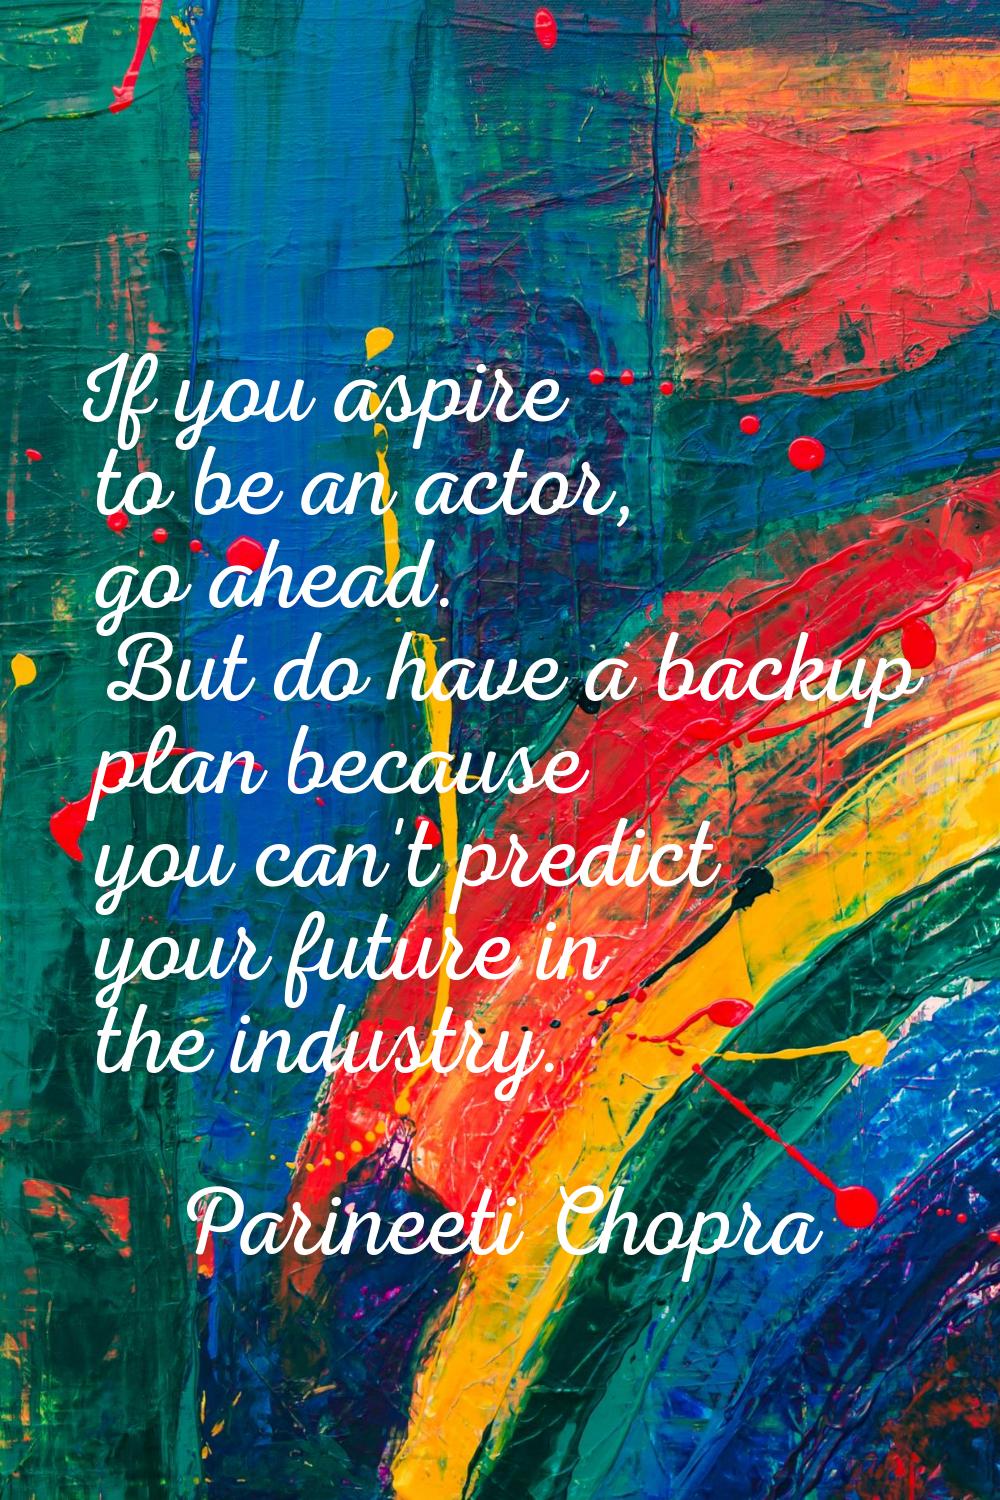 If you aspire to be an actor, go ahead. But do have a backup plan because you can't predict your fu